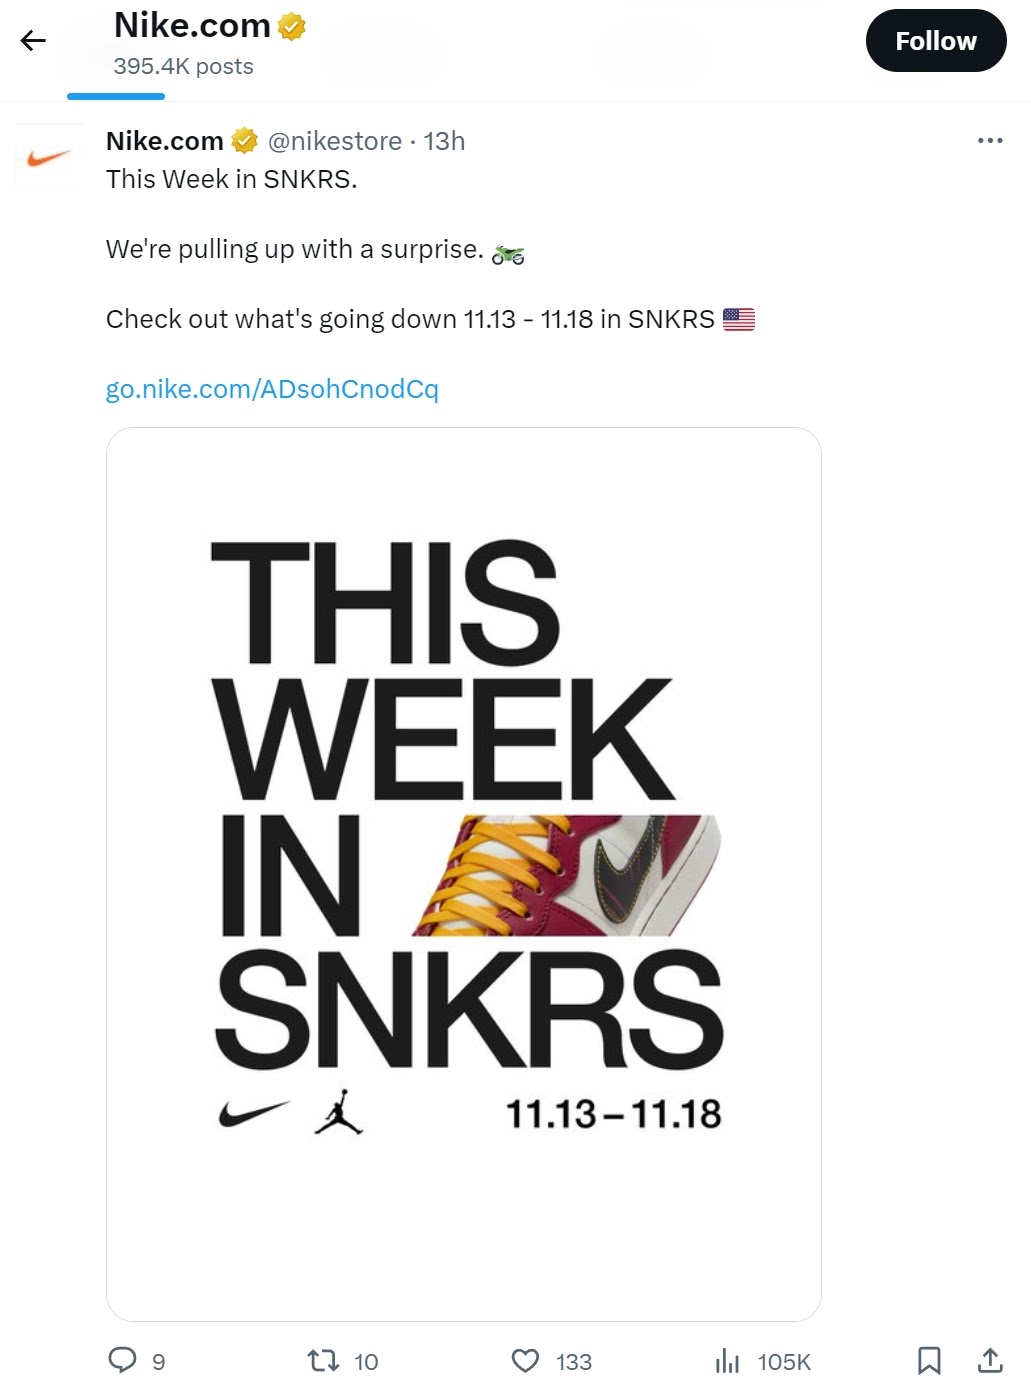 Nike's post on X (formerly Twitter) with "This Week in SNKTS" copy